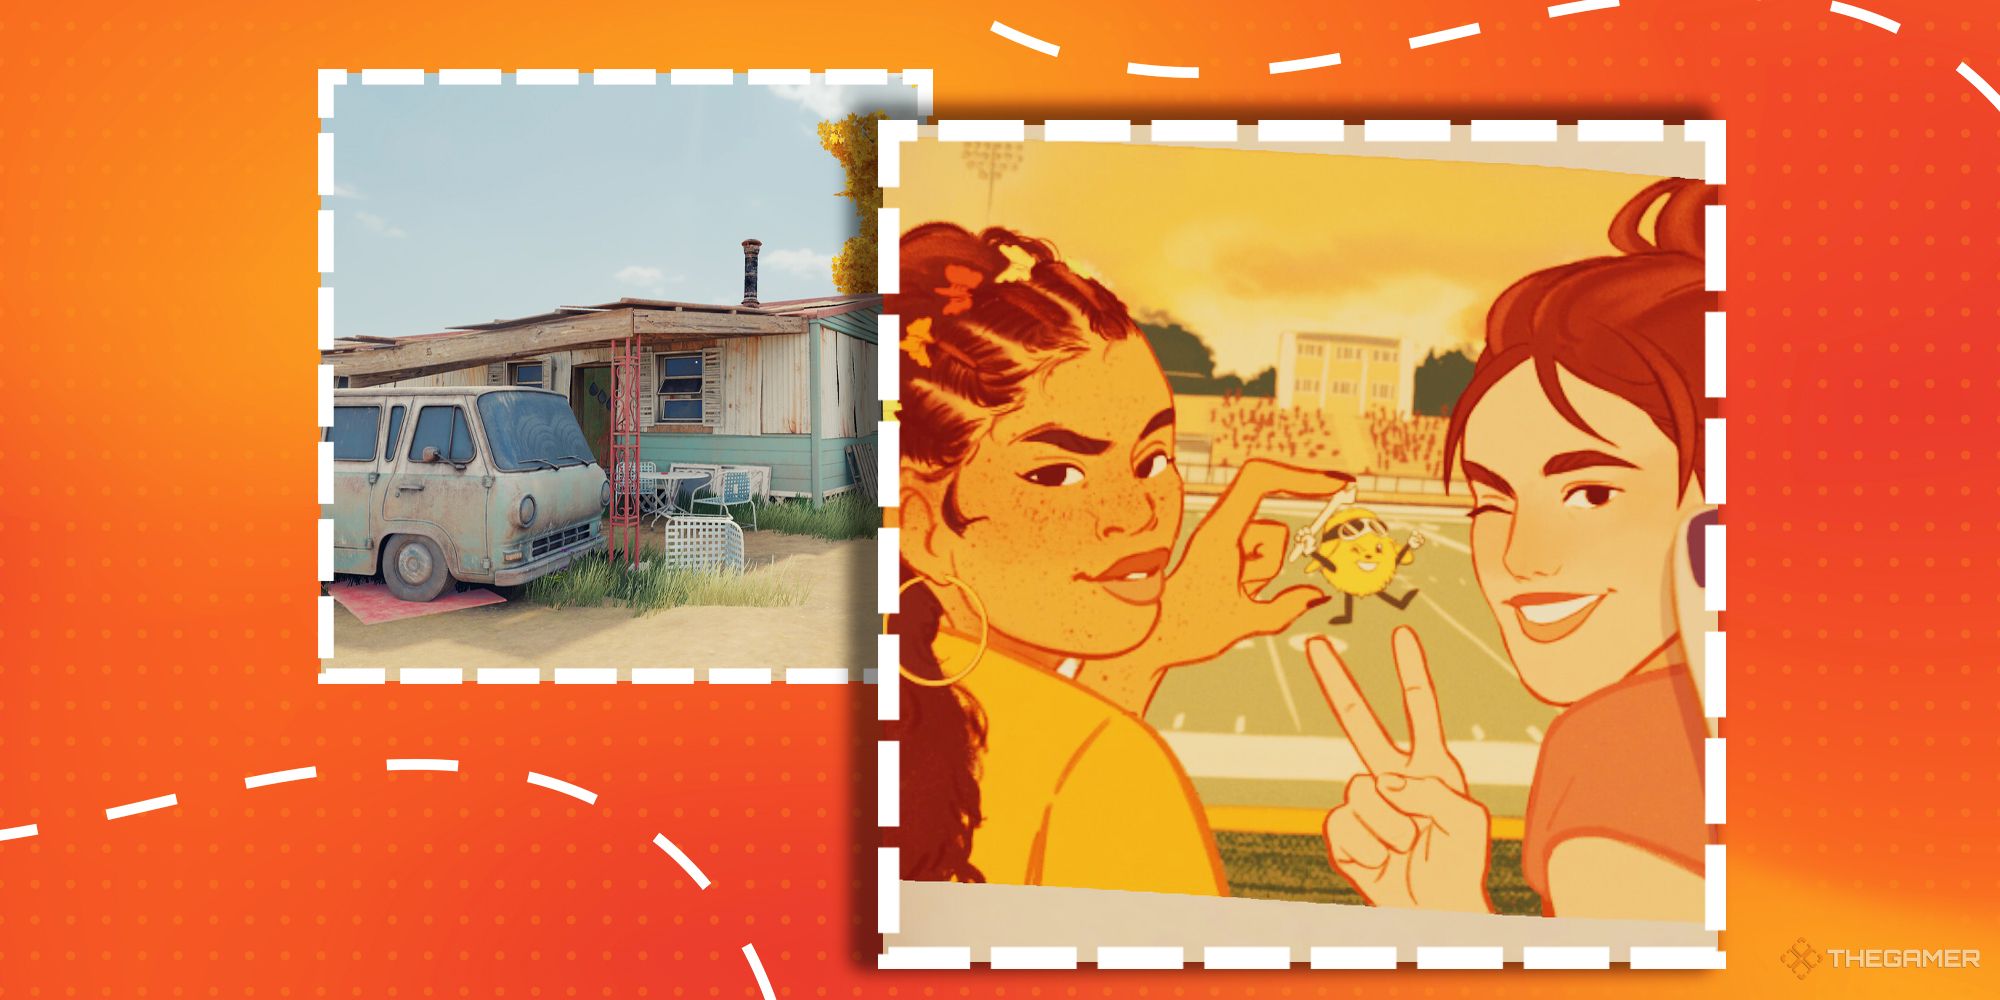 The summer house in Open Roads and an illustrated polaroid of Tess and a friend